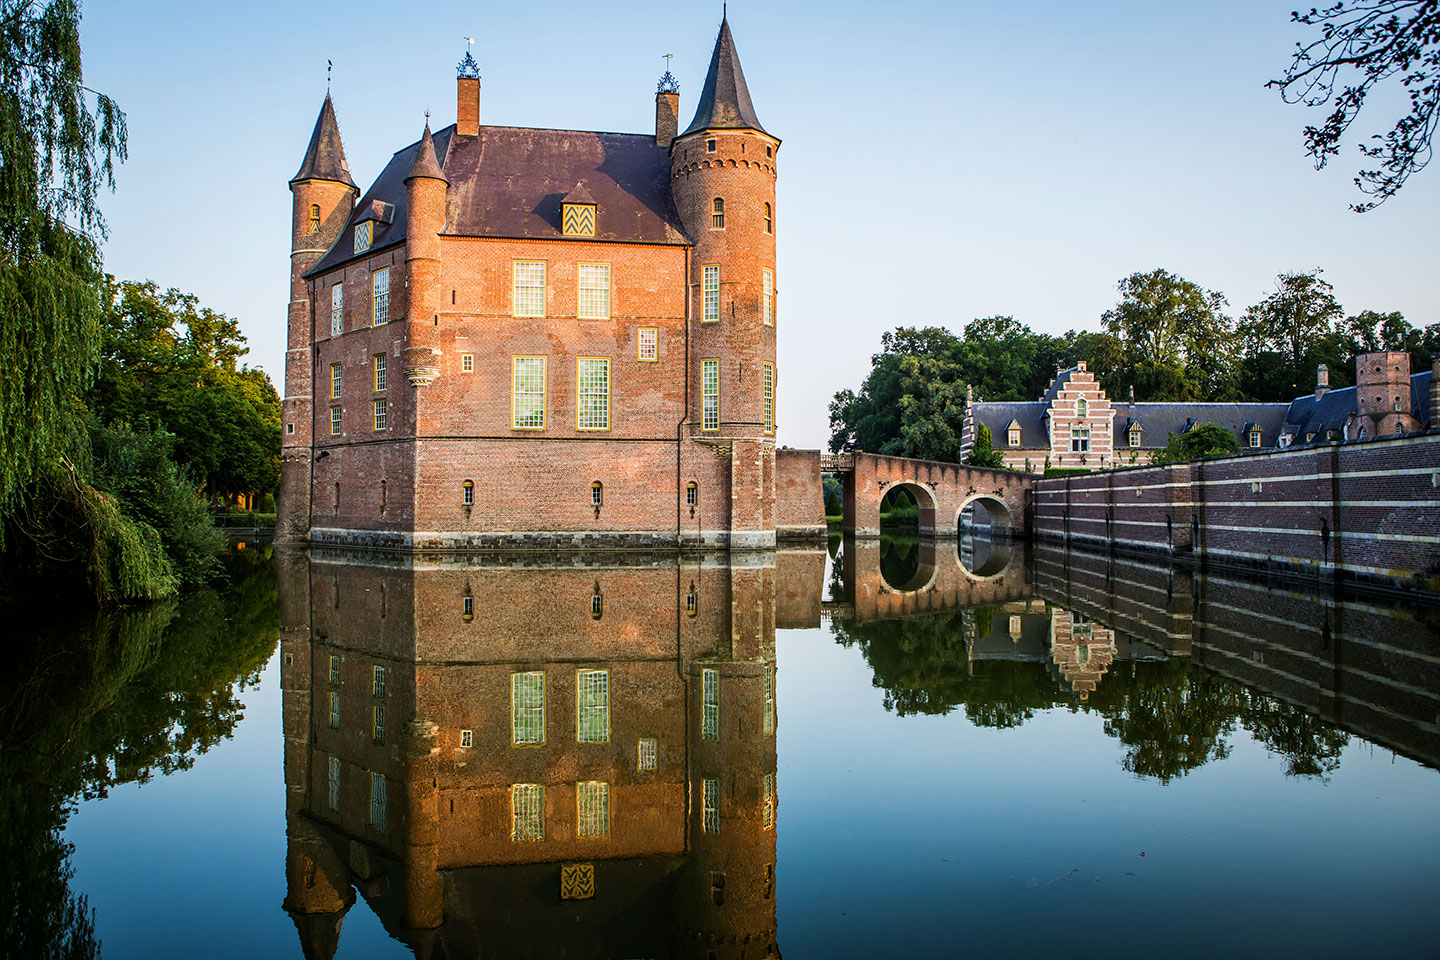 Heeswijk castle in the south of the Netherlands